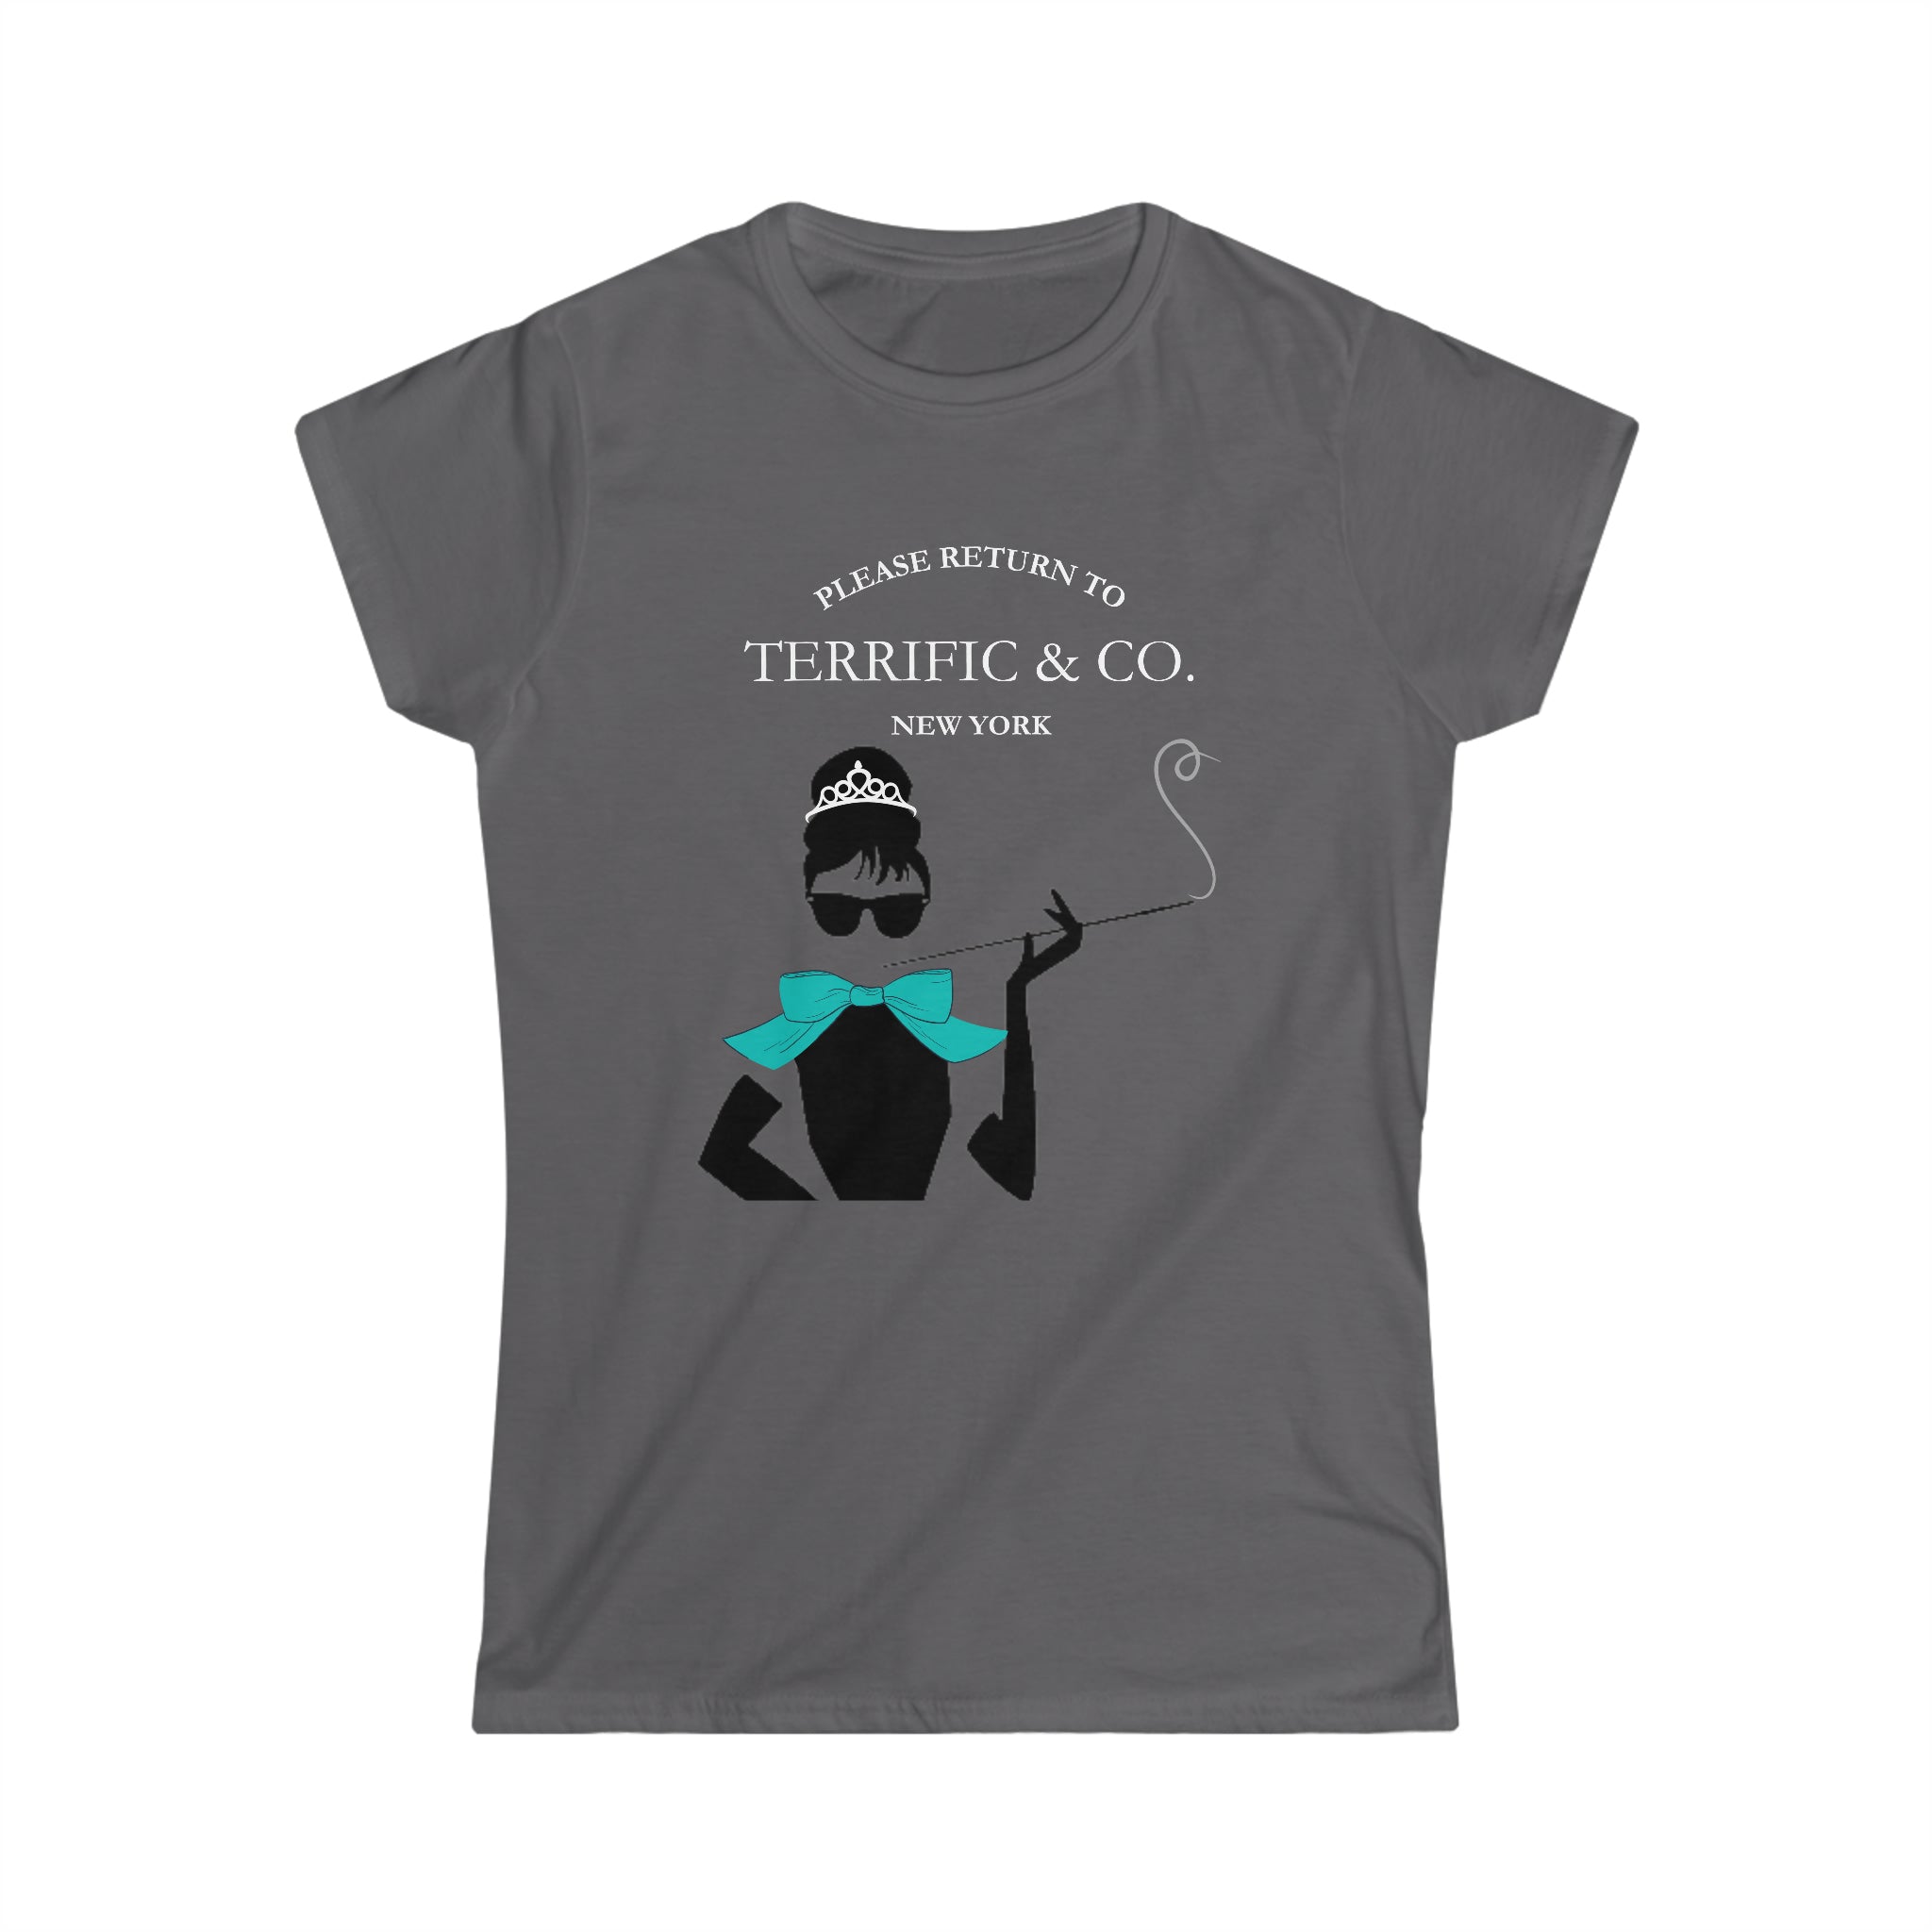 Terrific and Co. (Silhouette + Bow) Designer inspired Women's Softstyle Tee, Women's Fashion Tshirt T-Shirt Charcoal-2XL The Middle Aged Groove